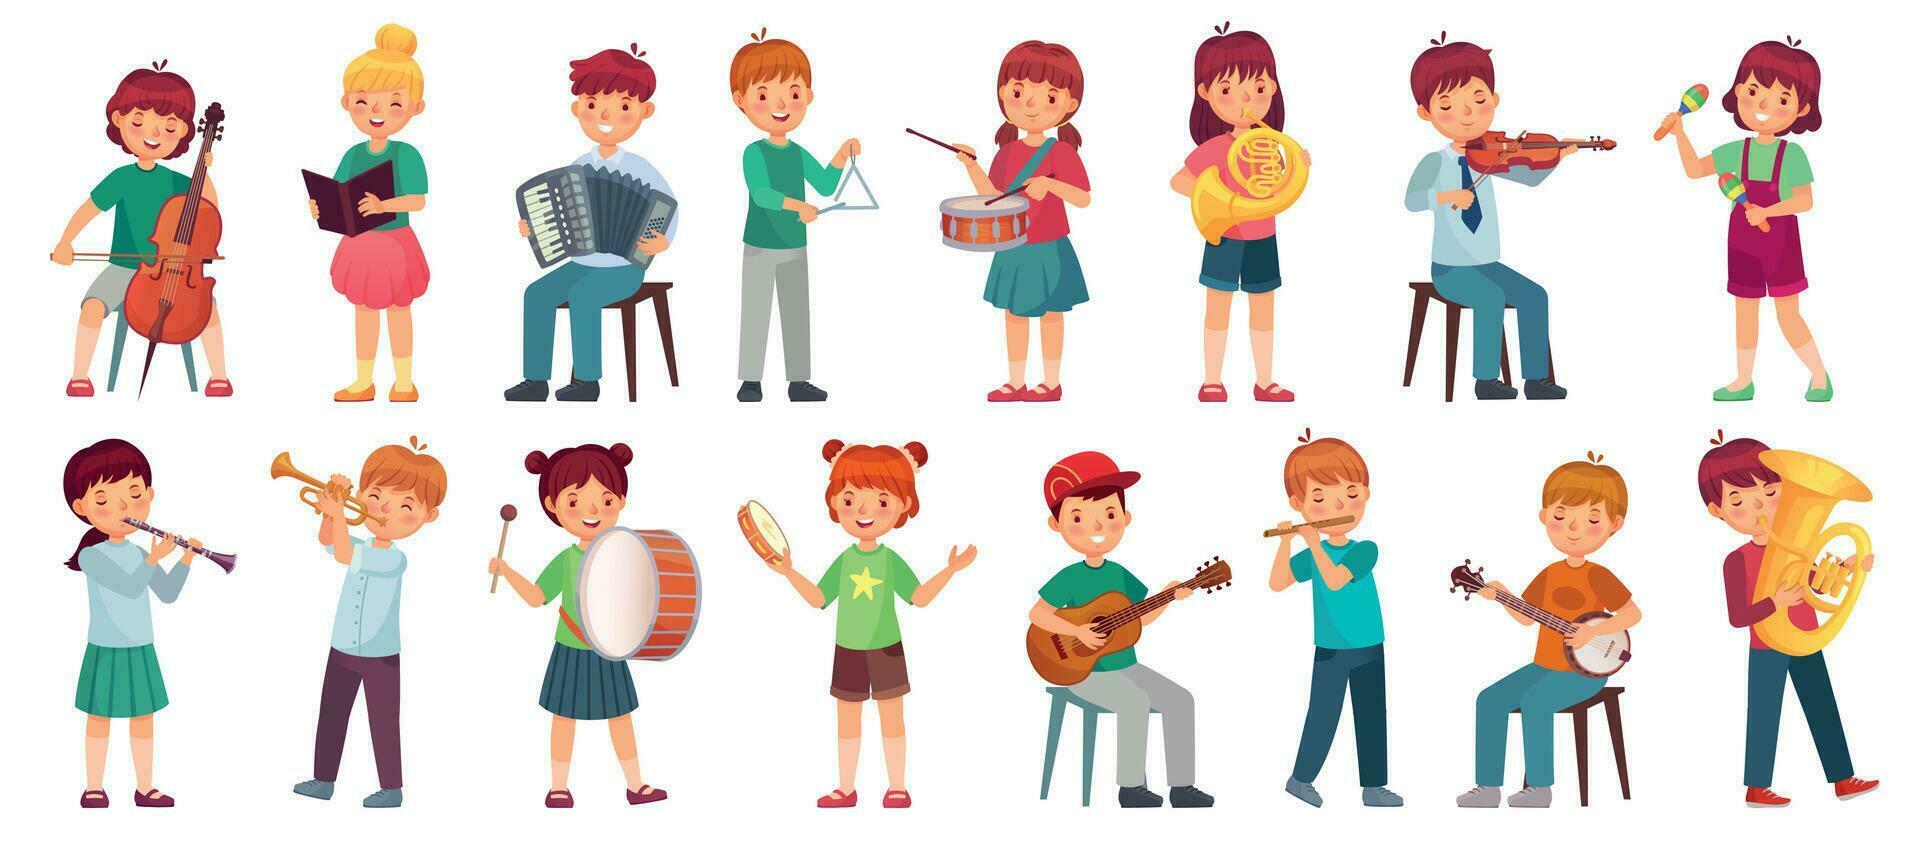 Children orchestra play music. Child playing ukulele guitar, girl sing song and play drum. Kids musicians with music instruments vector illustration set